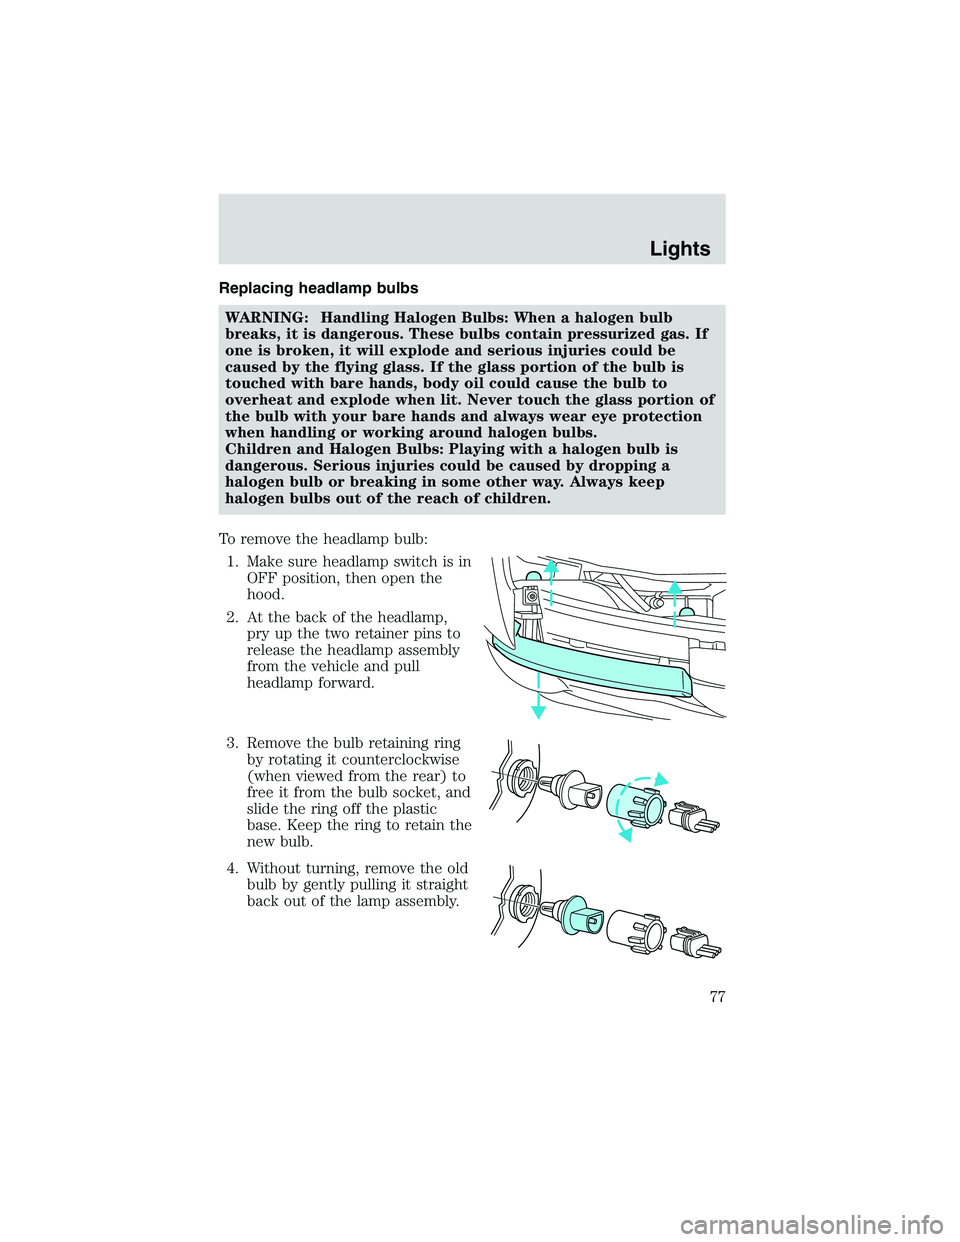 MAZDA MODEL B4000 4WD 2002  Owners Manual Replacing headlamp bulbsWARNING: Handling Halogen Bulbs: When a halogen bulb
breaks, it is dangerous. These bulbs contain pressurized gas. If
one is broken, it will explode and serious injuries could 